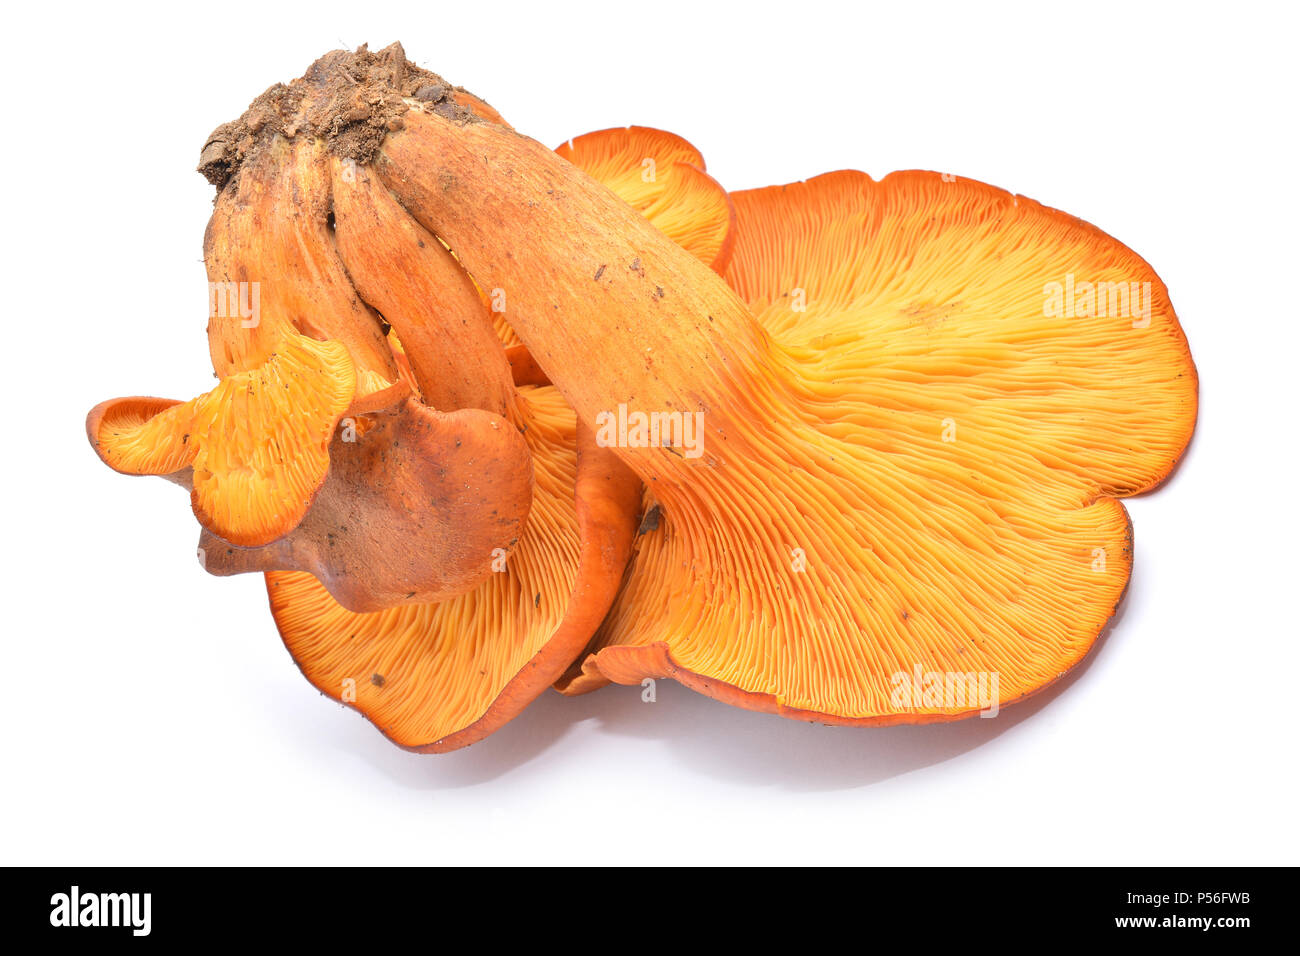 Omphalotus olearius toxiques champignons isolated on white Banque D'Images